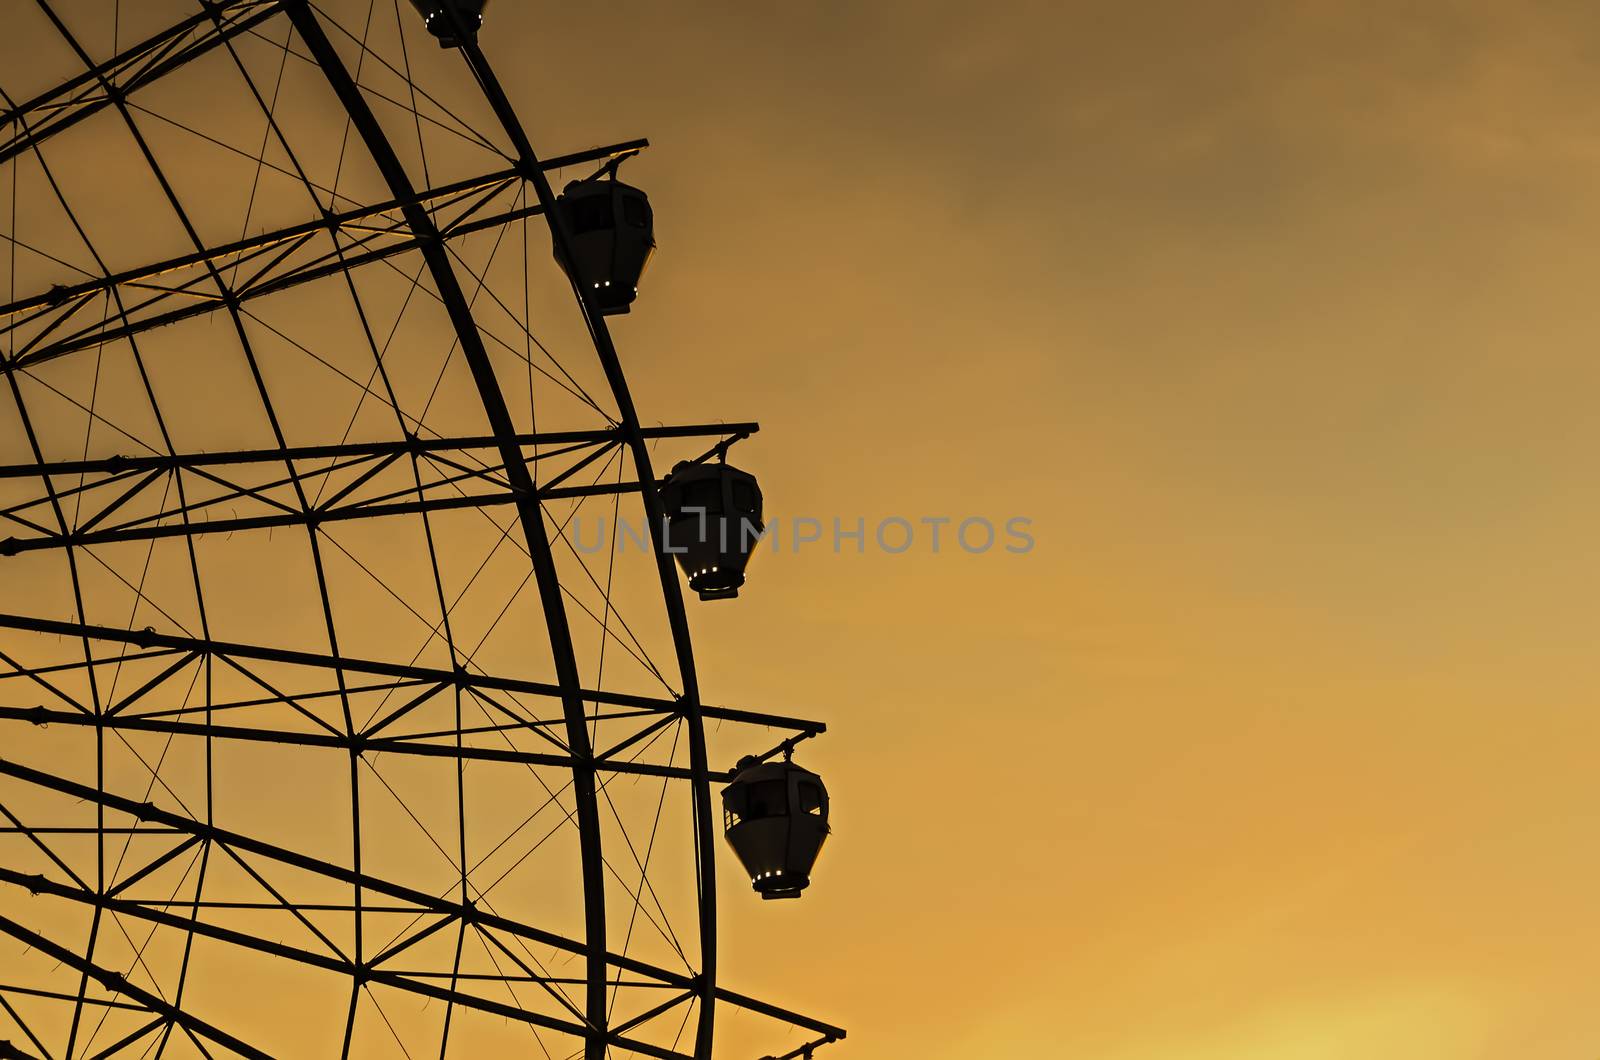 Sunset view of giant ferris wheel in the Philippines